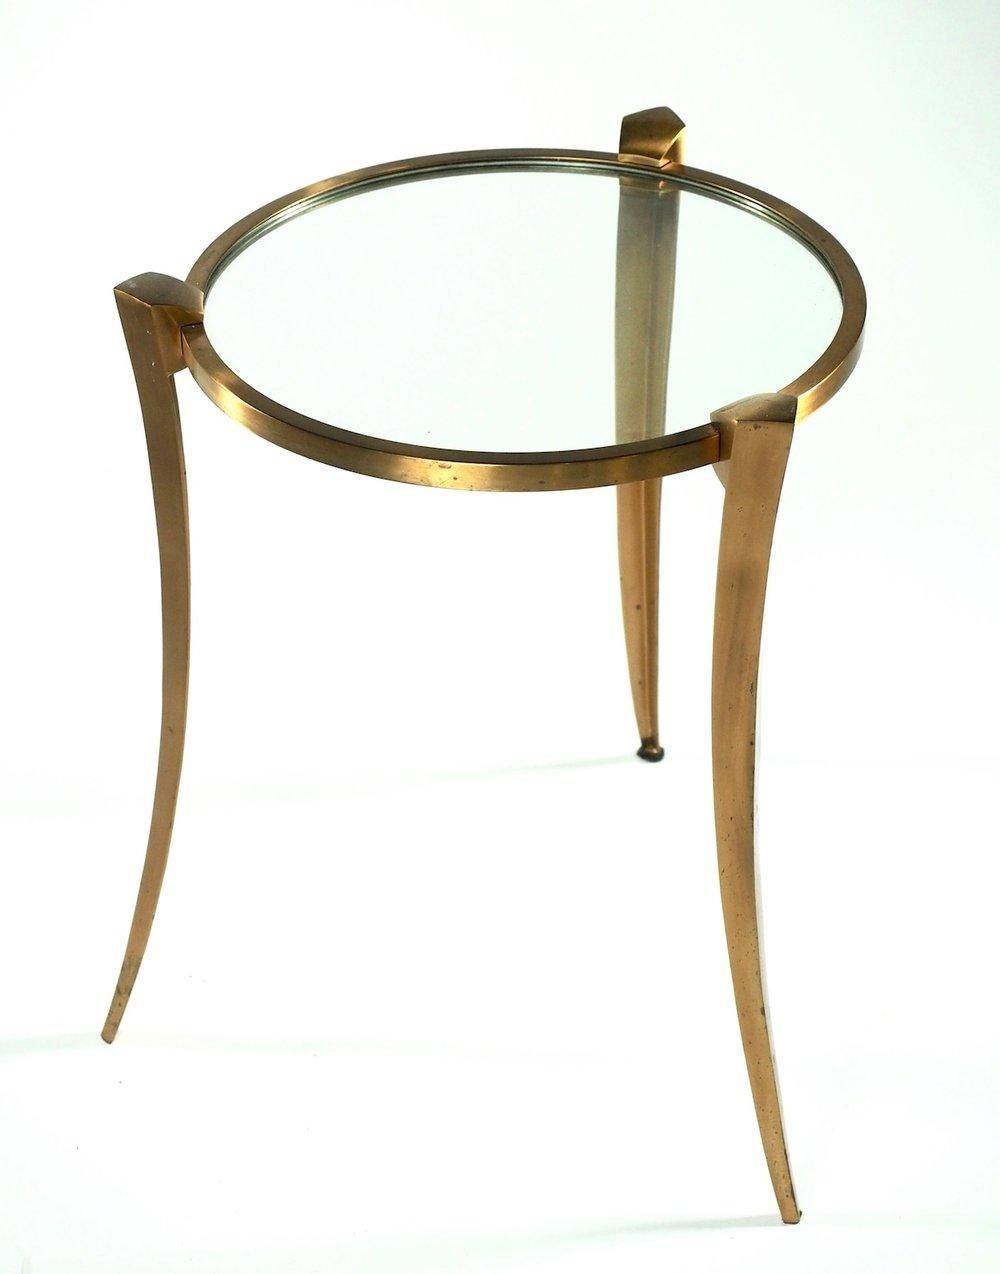 French, circa 1960, bronze and glass side table by Maxime Old. Superb original condition. Measures: 18.5” diameter x 23.5” high.